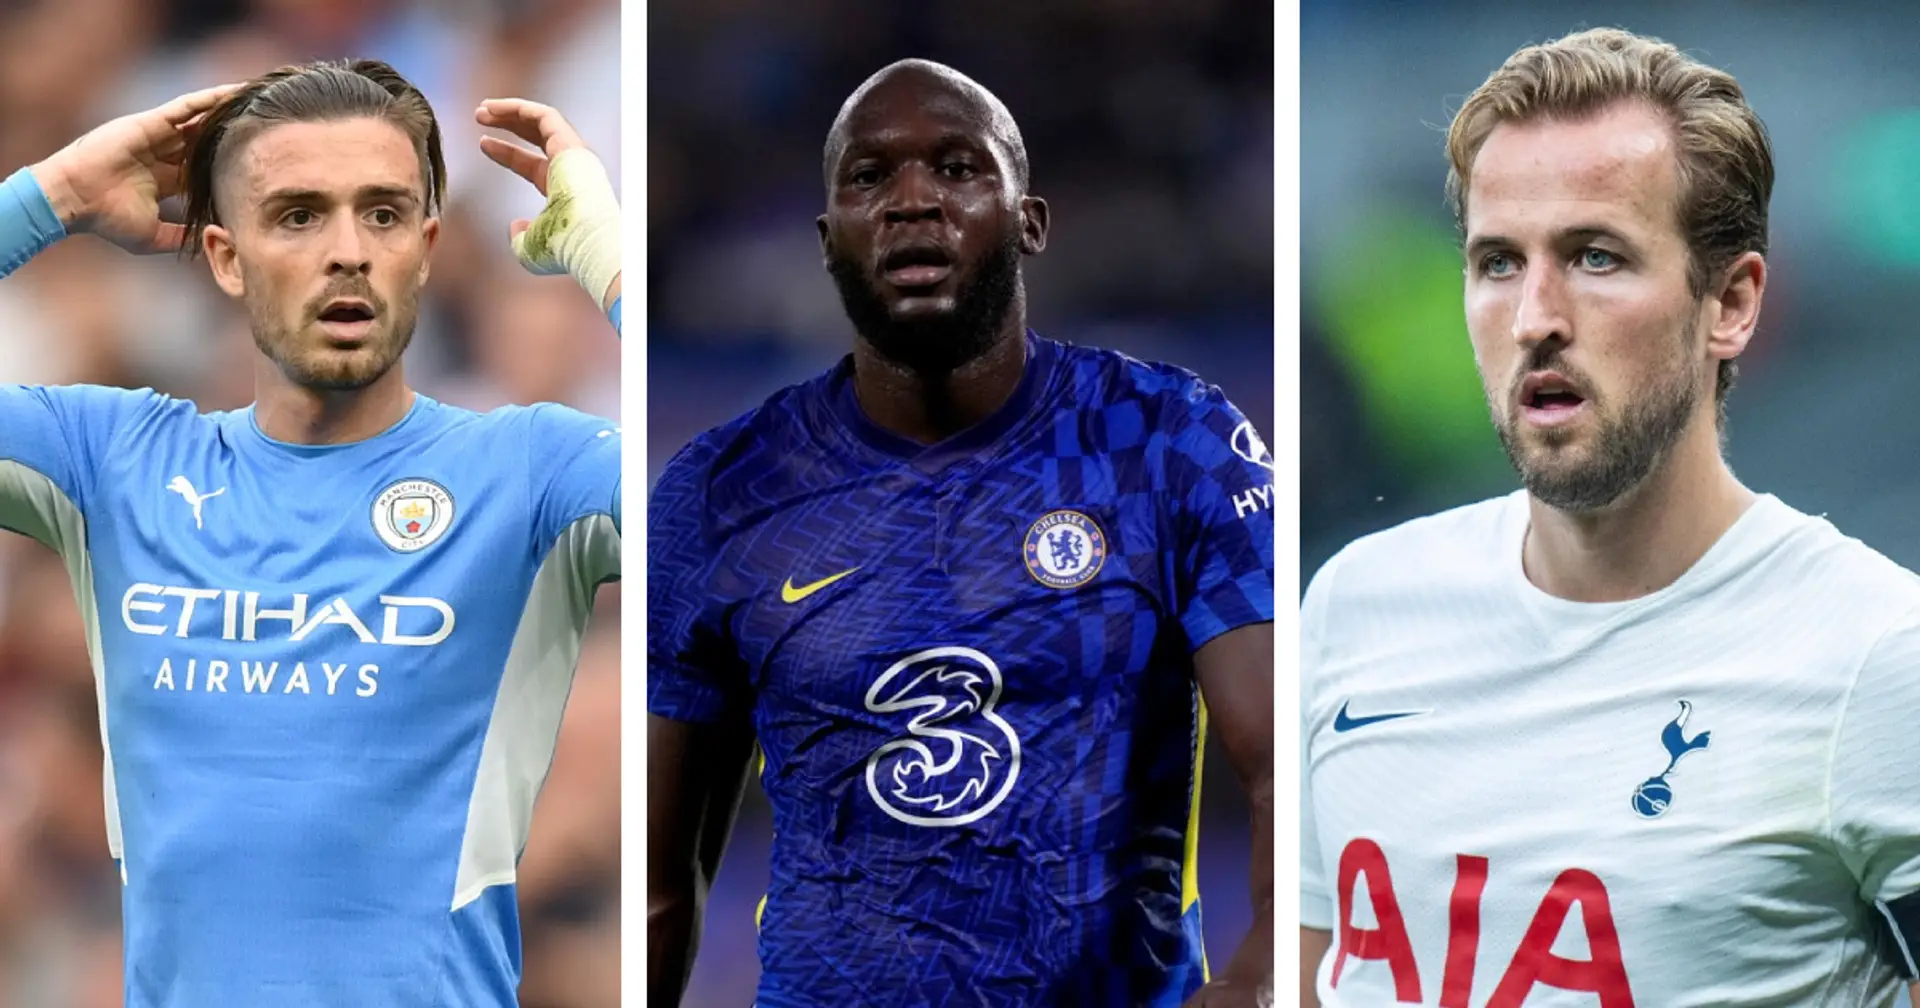 1 Chelsea player makes the cut: top 10 most expensive Premier League players revealed